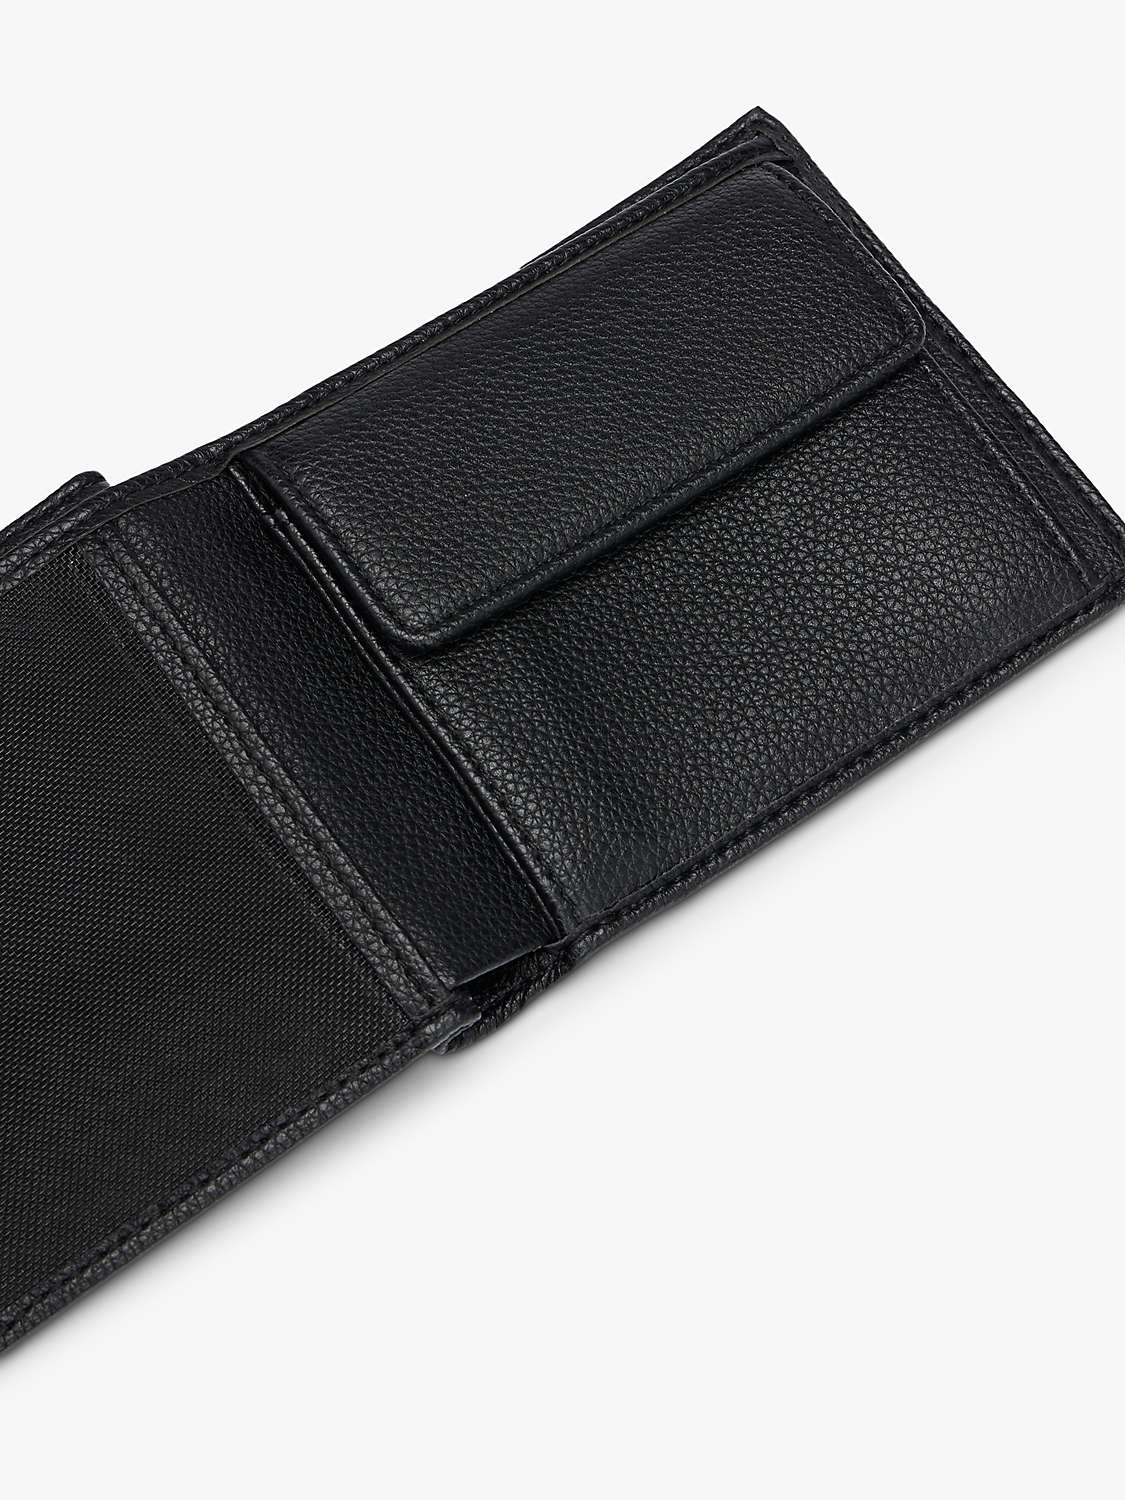 Buy BOSS Ray Faux Leather Trifold Wallet, Black Online at johnlewis.com